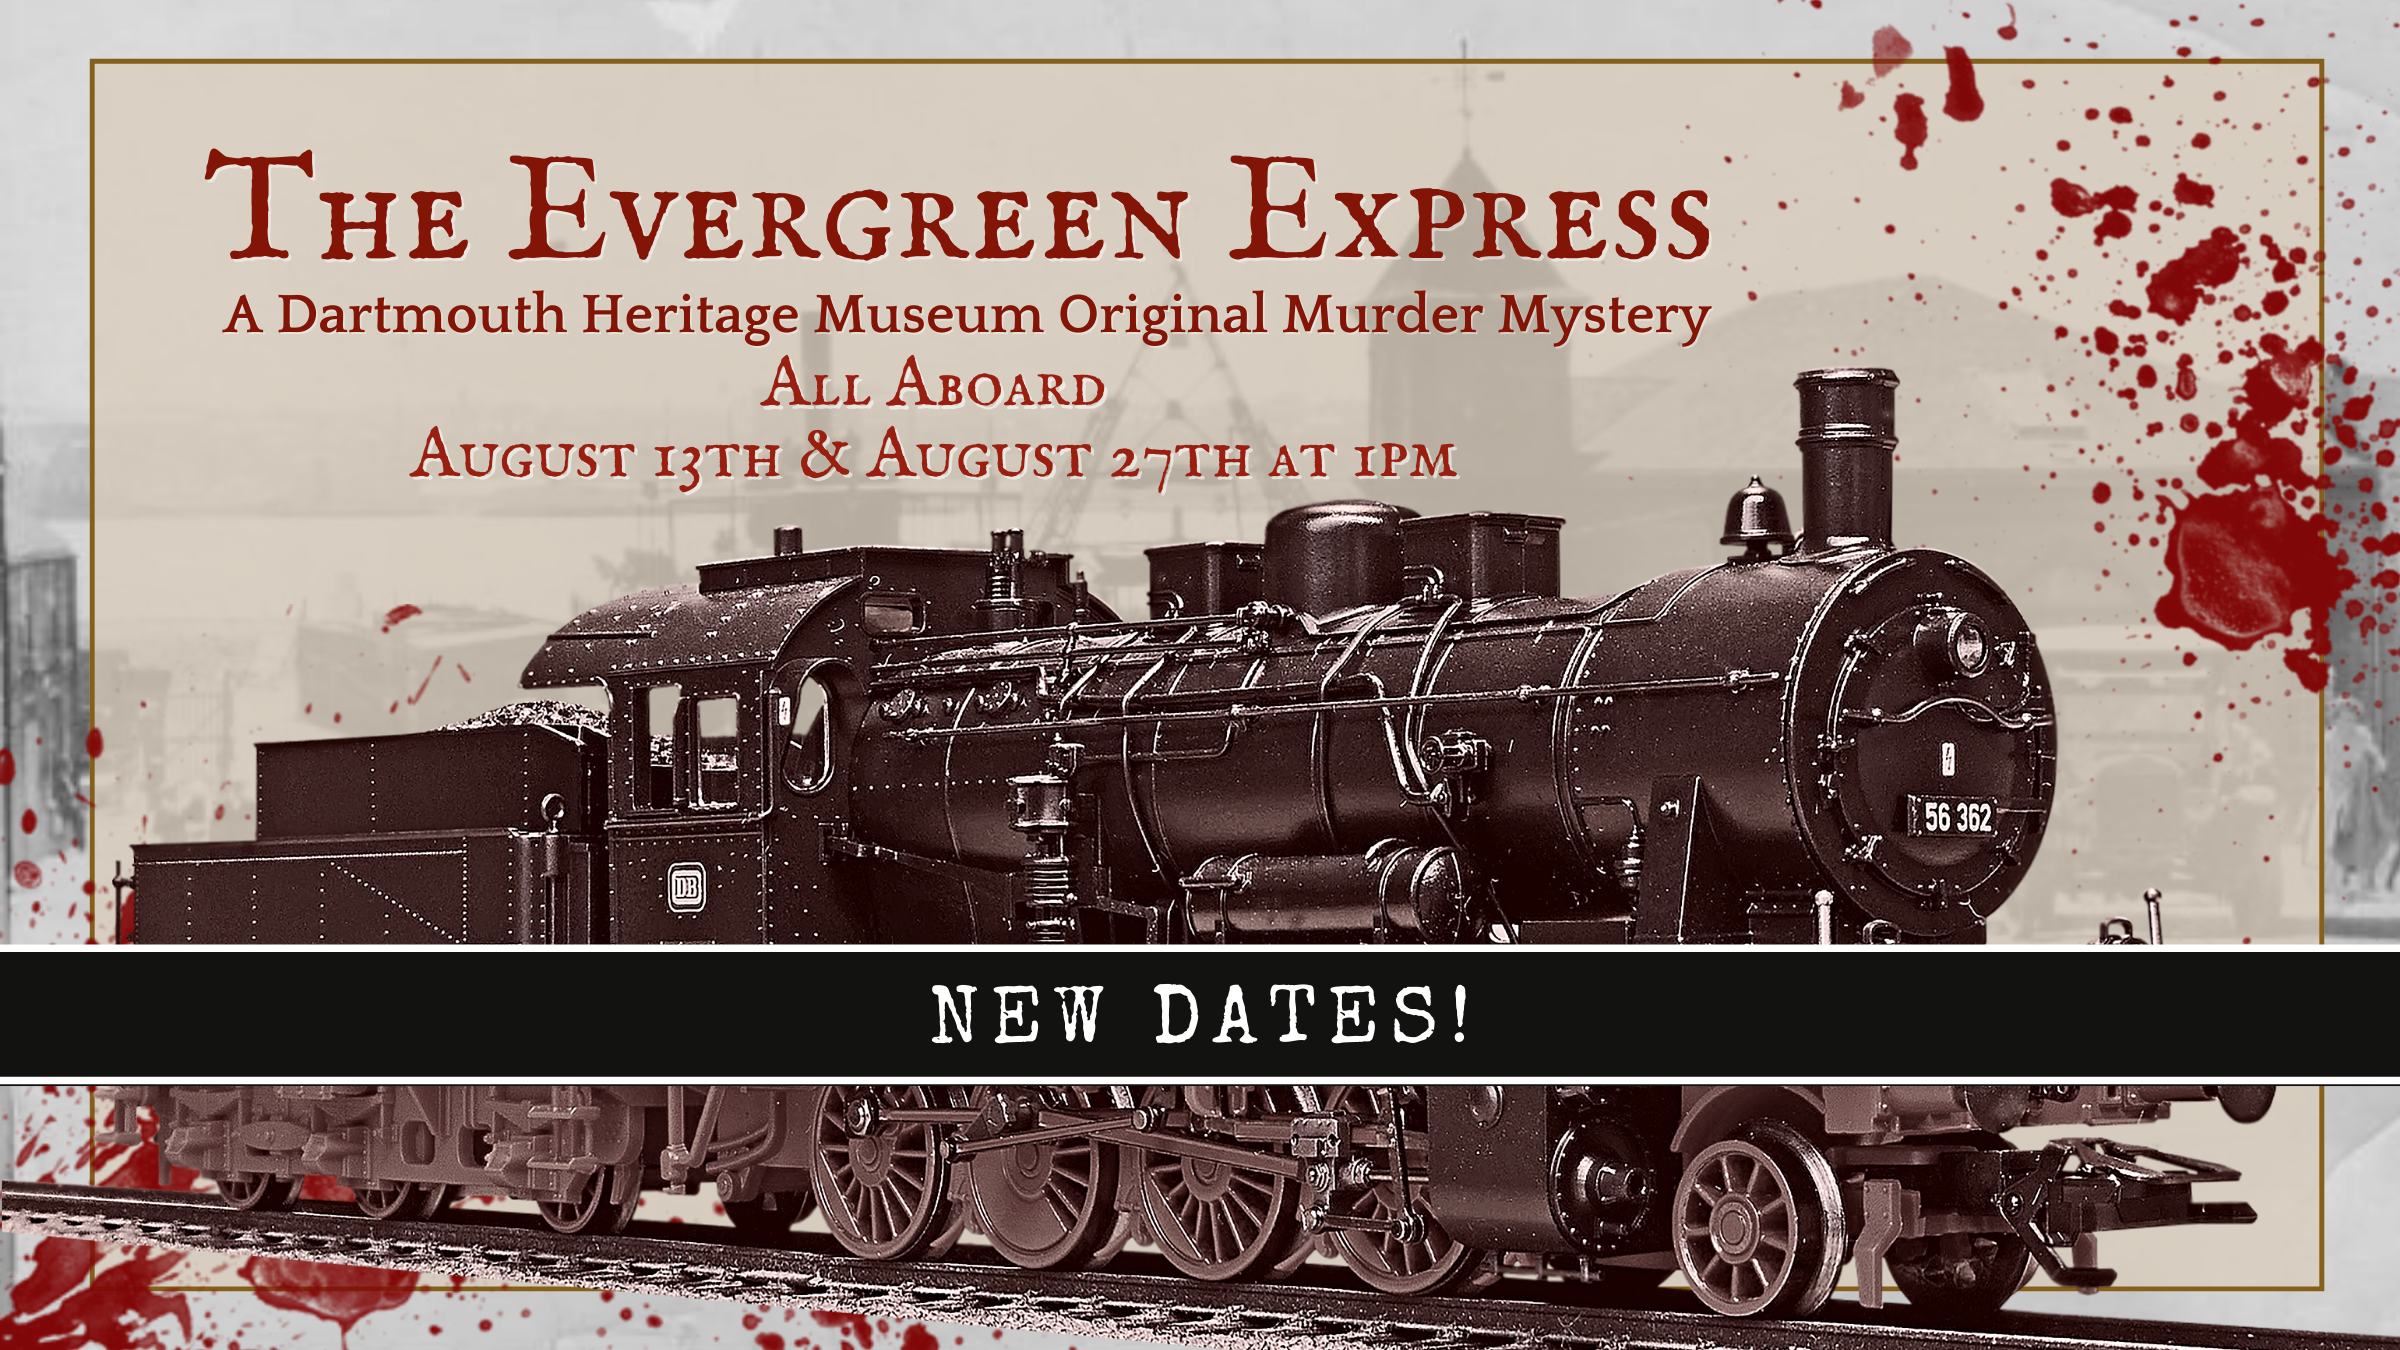 The Evergreen Express; August 13th and 27th @ 1pm